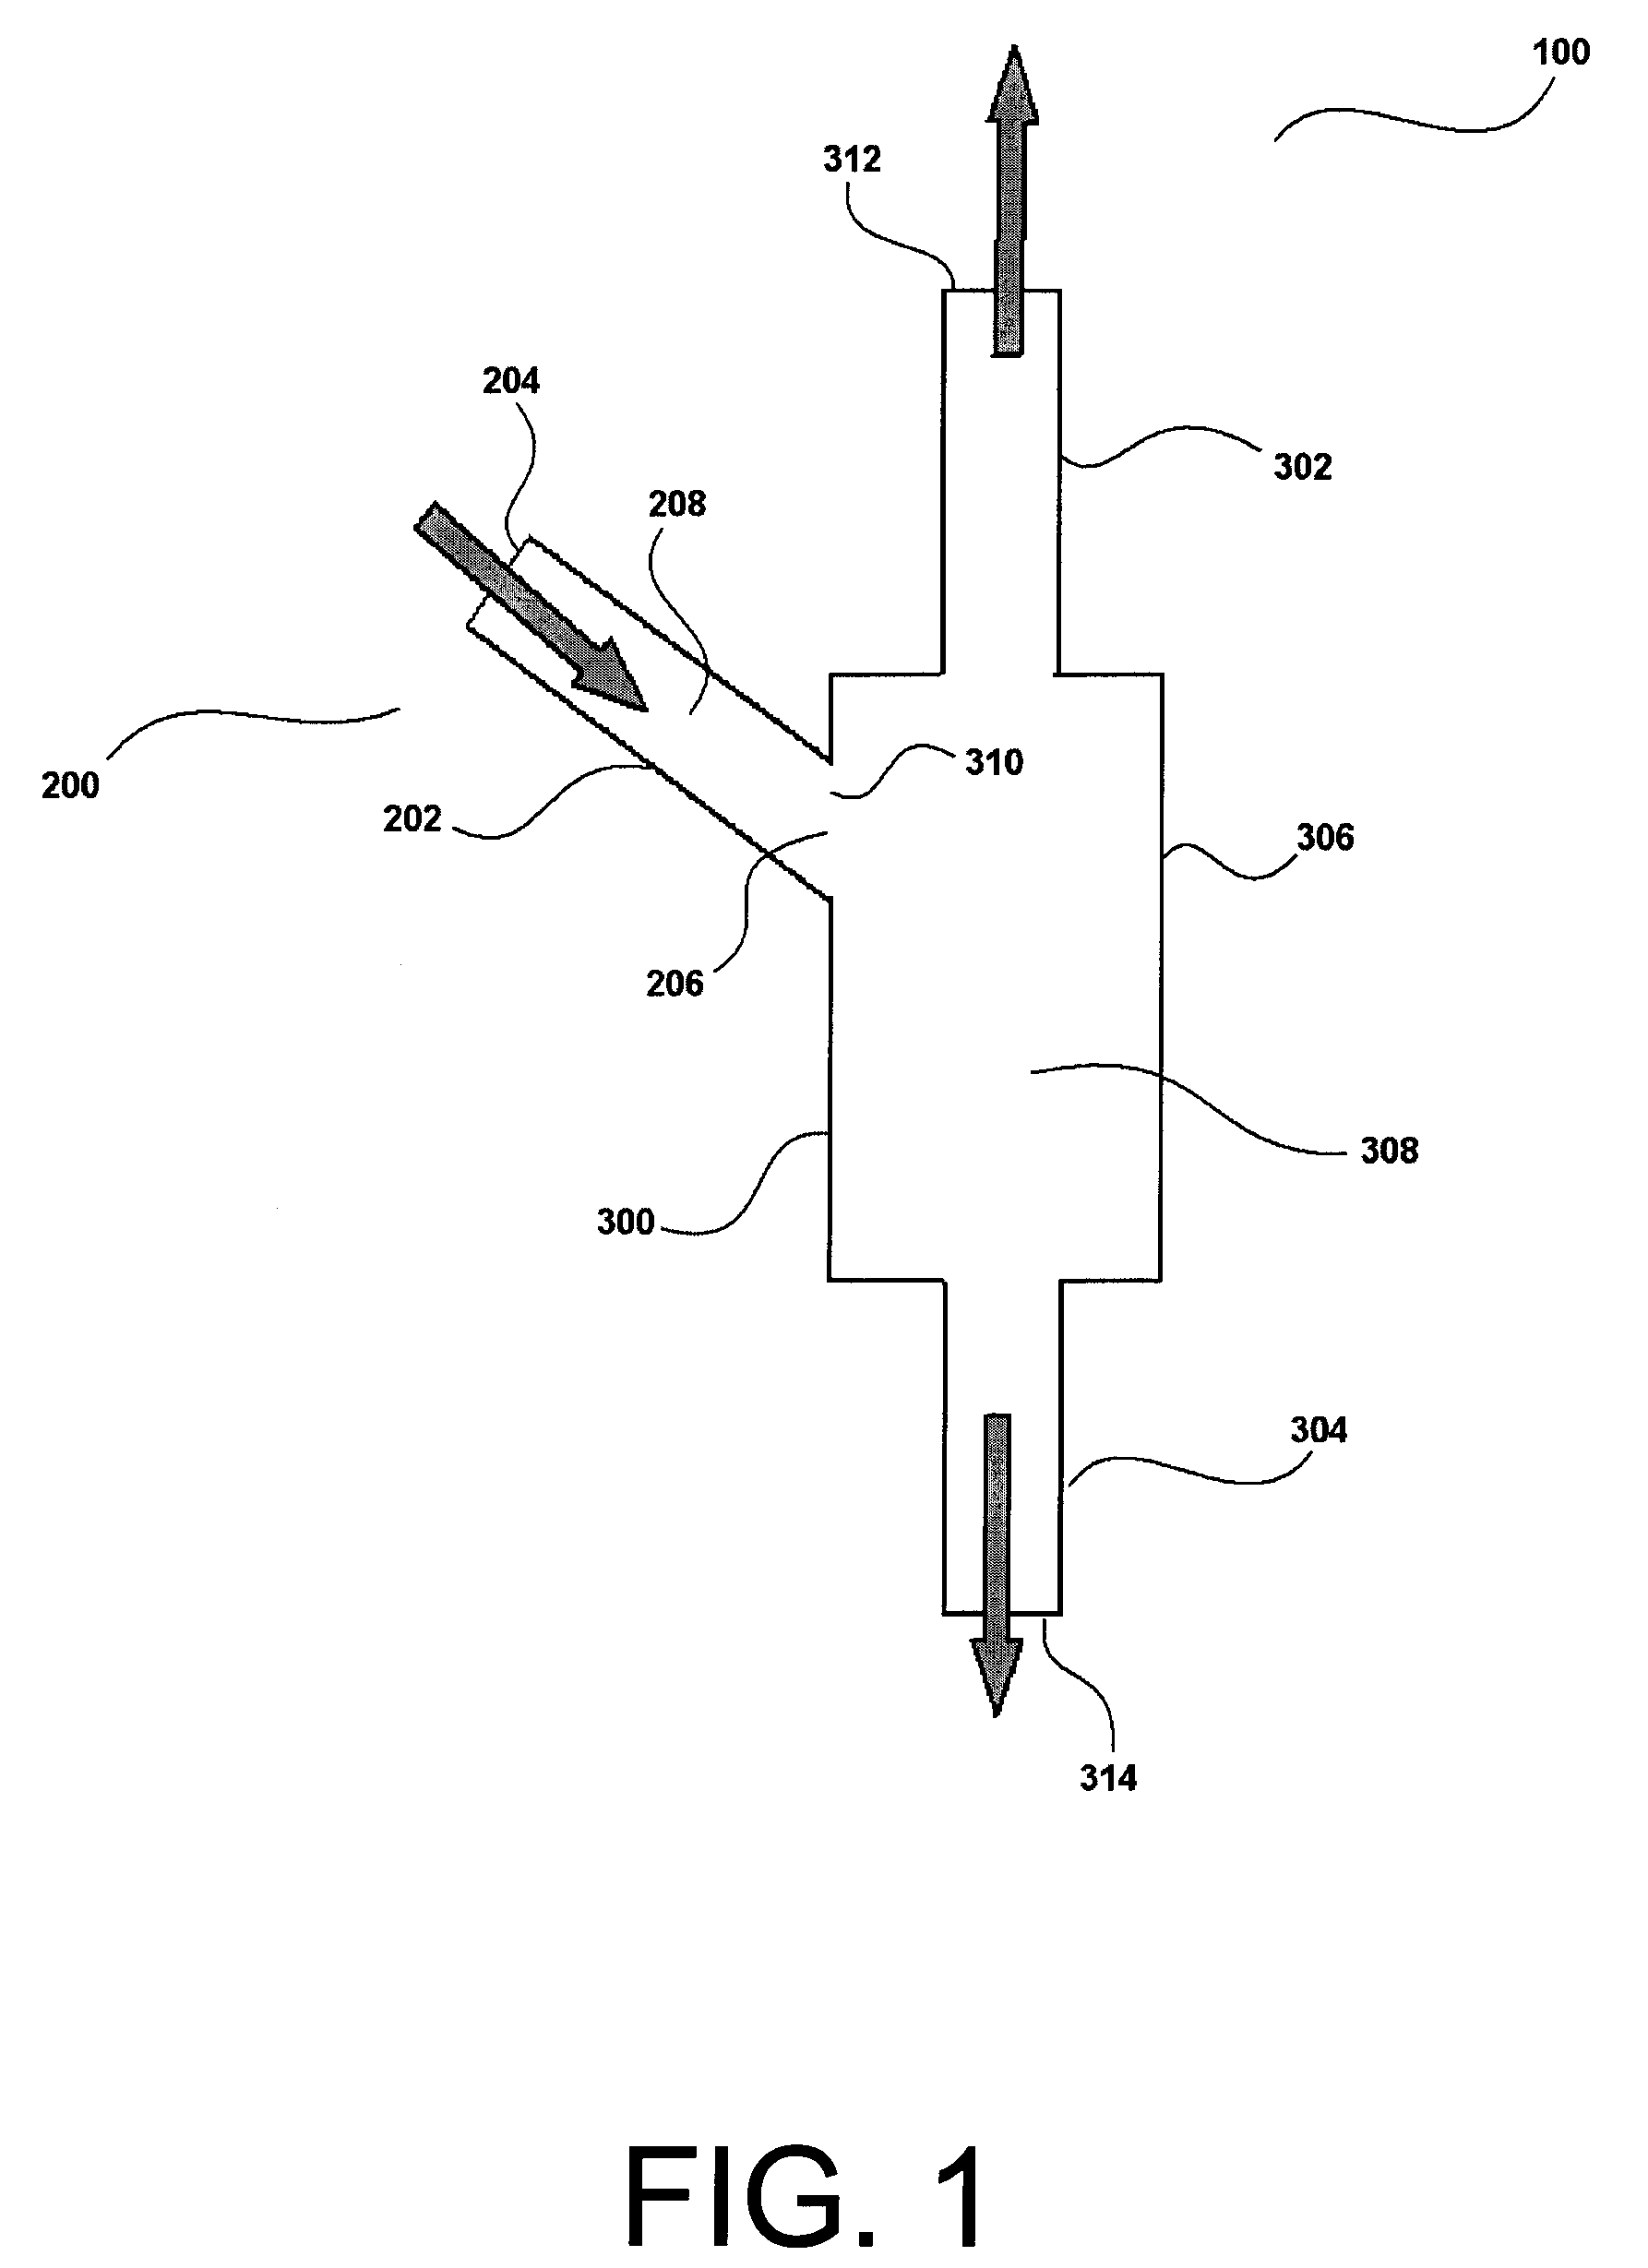 Method and apparatus for the separation of a gas-solids mixture in a circulating fluidized bed reactor